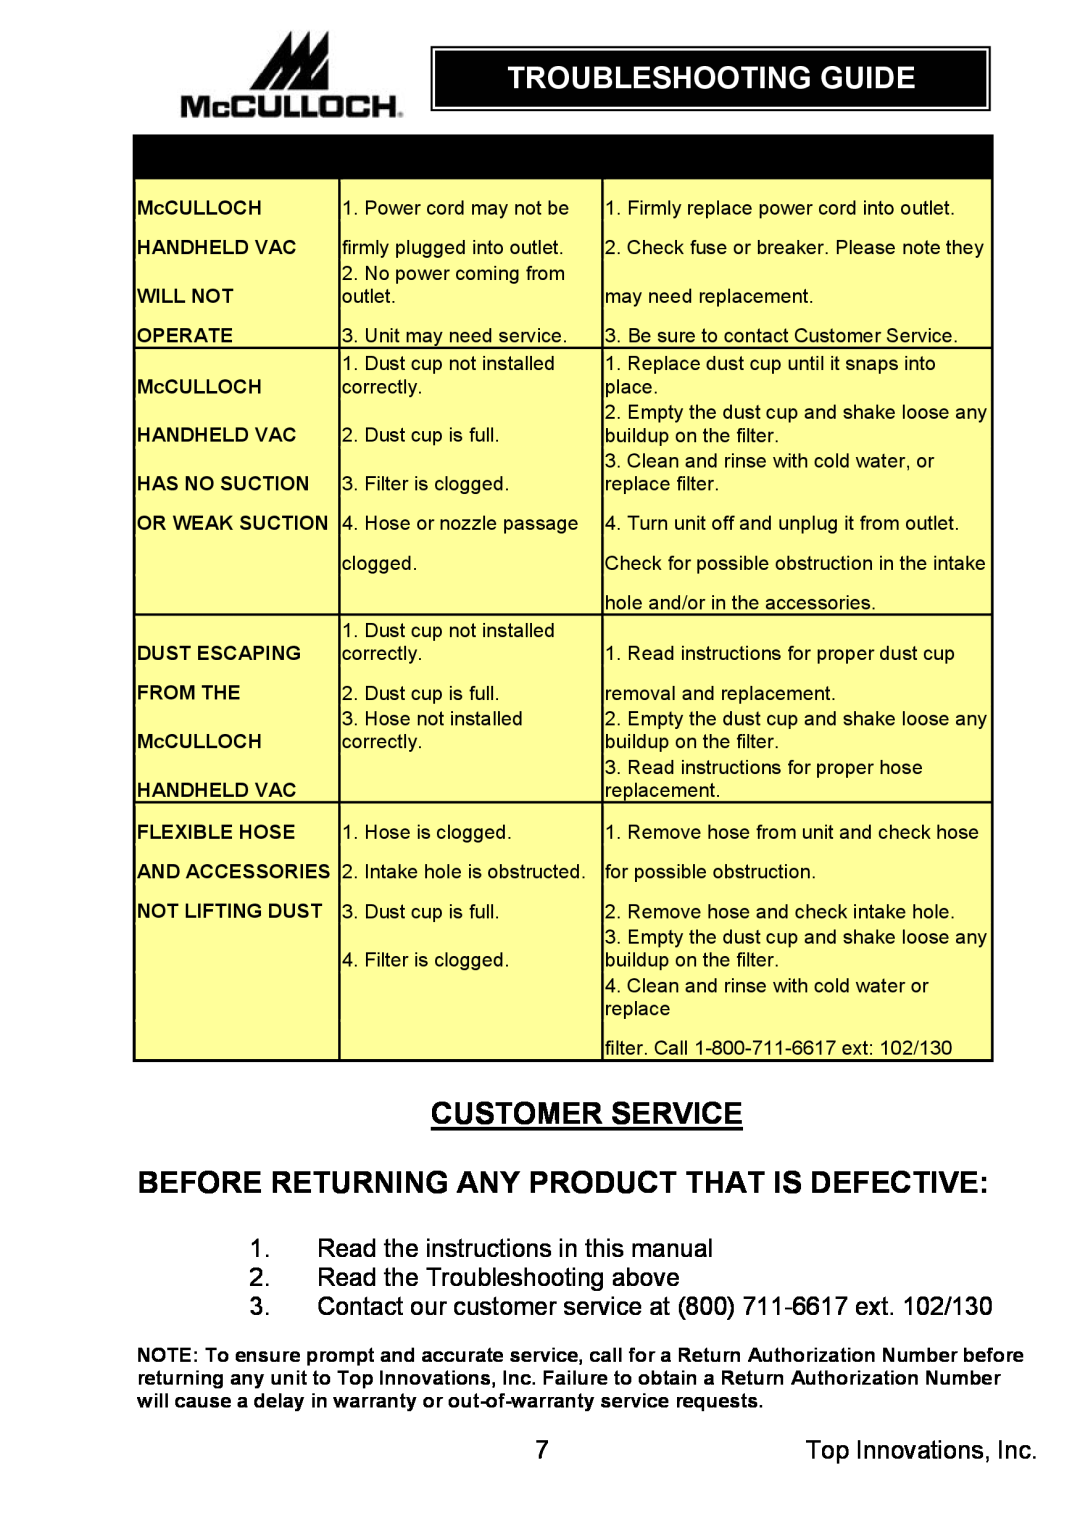 Top Innovations MC1910 warranty Troubleshooting Guide, Customer Service, Before Returning Any Product That Is Defective 